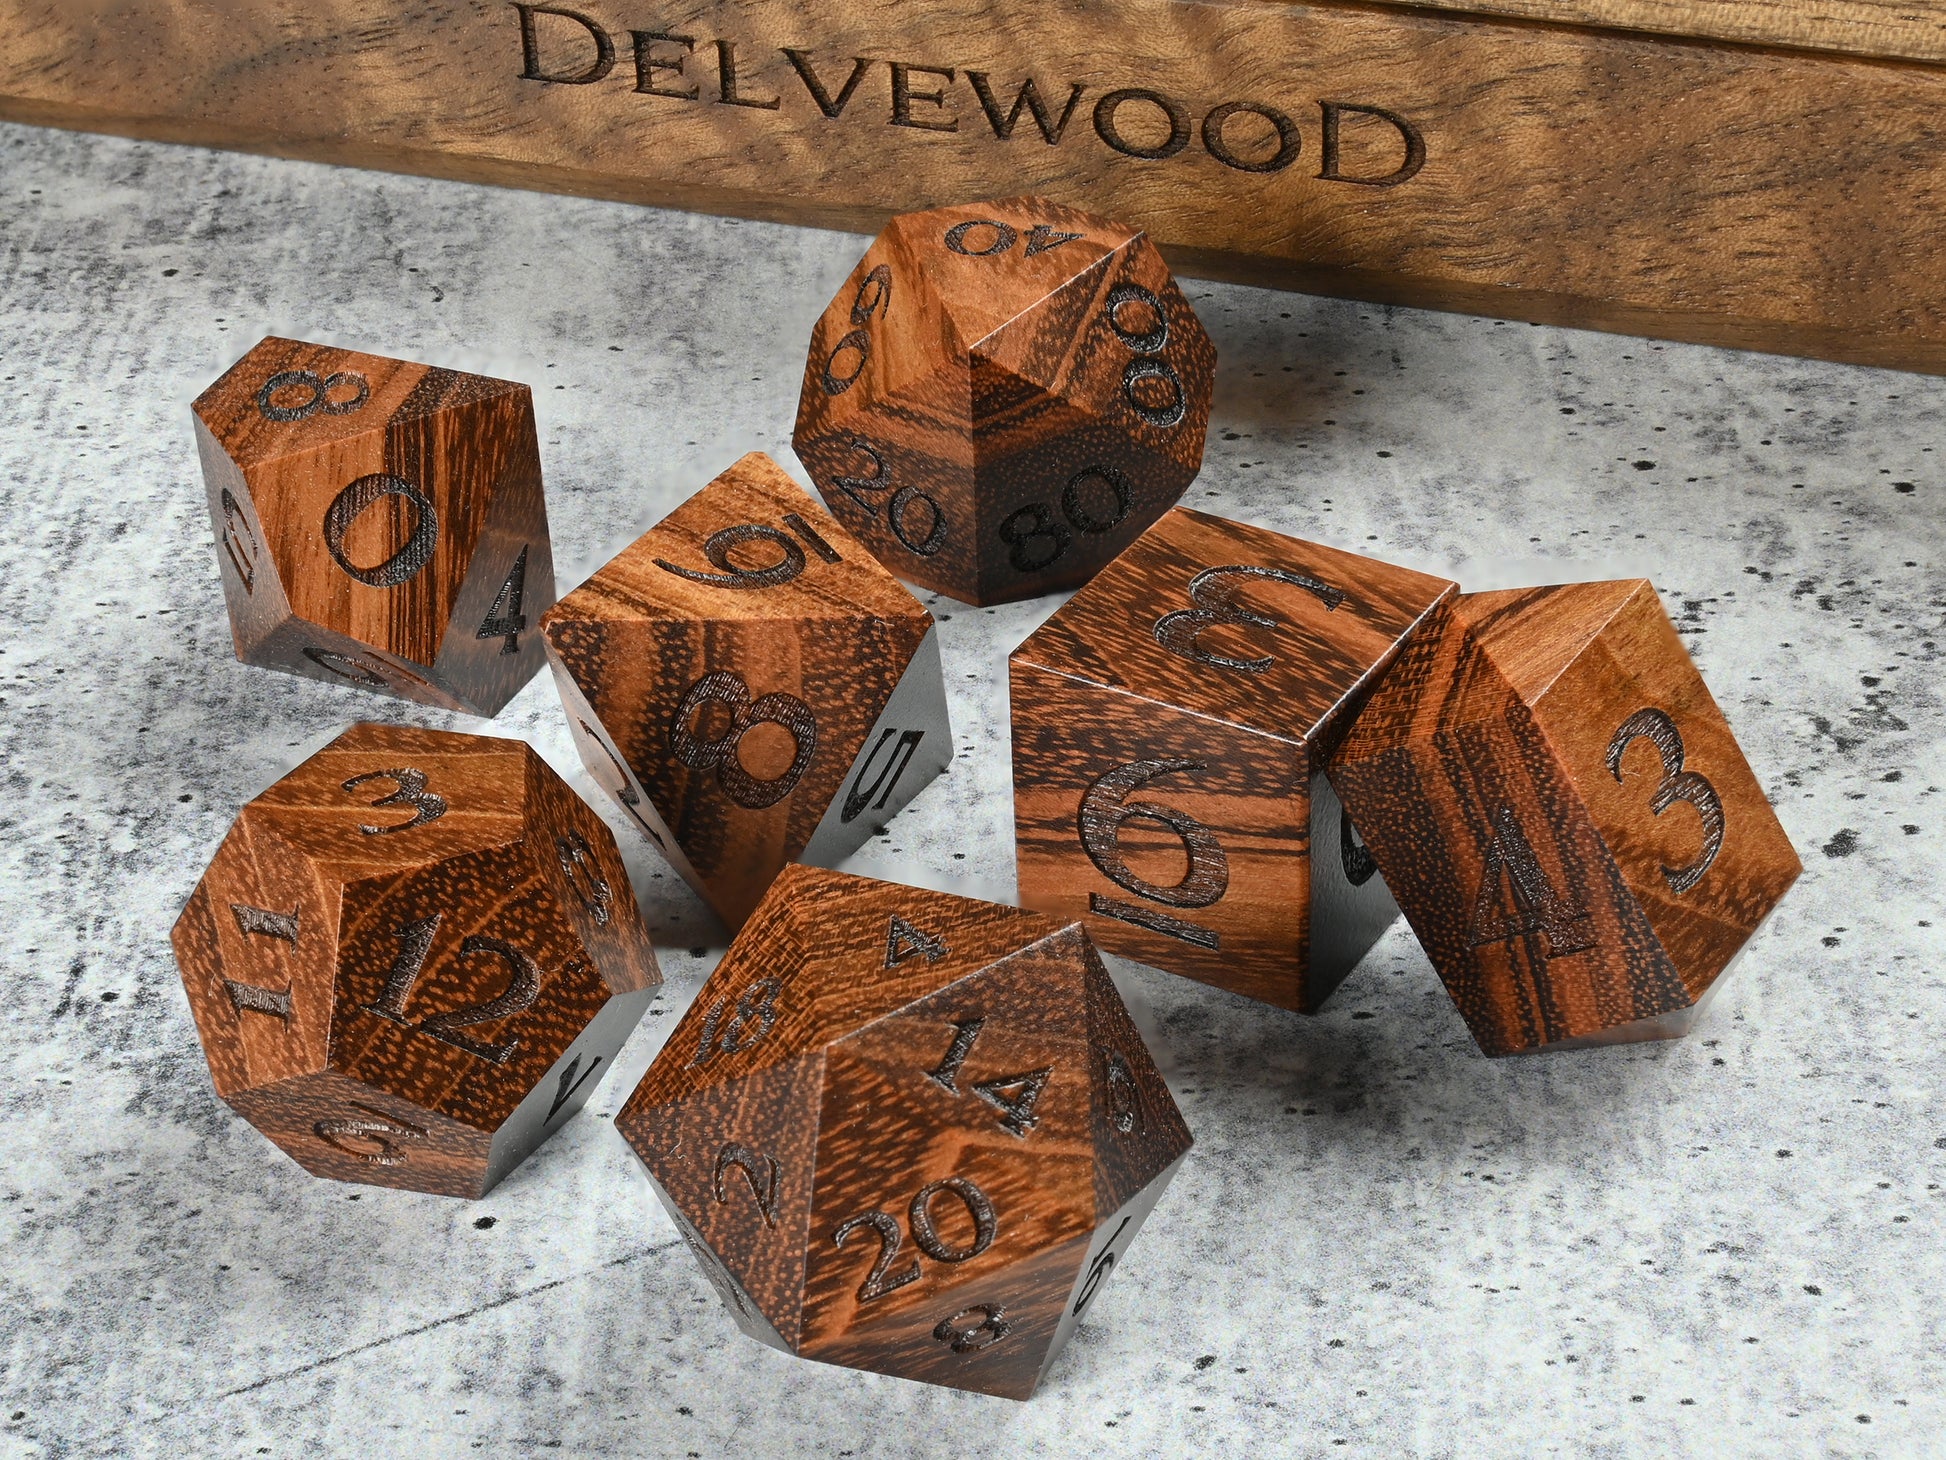 Quebracho axebreaker wood dice for dnd rpg dungeons and dragons tabletop games.